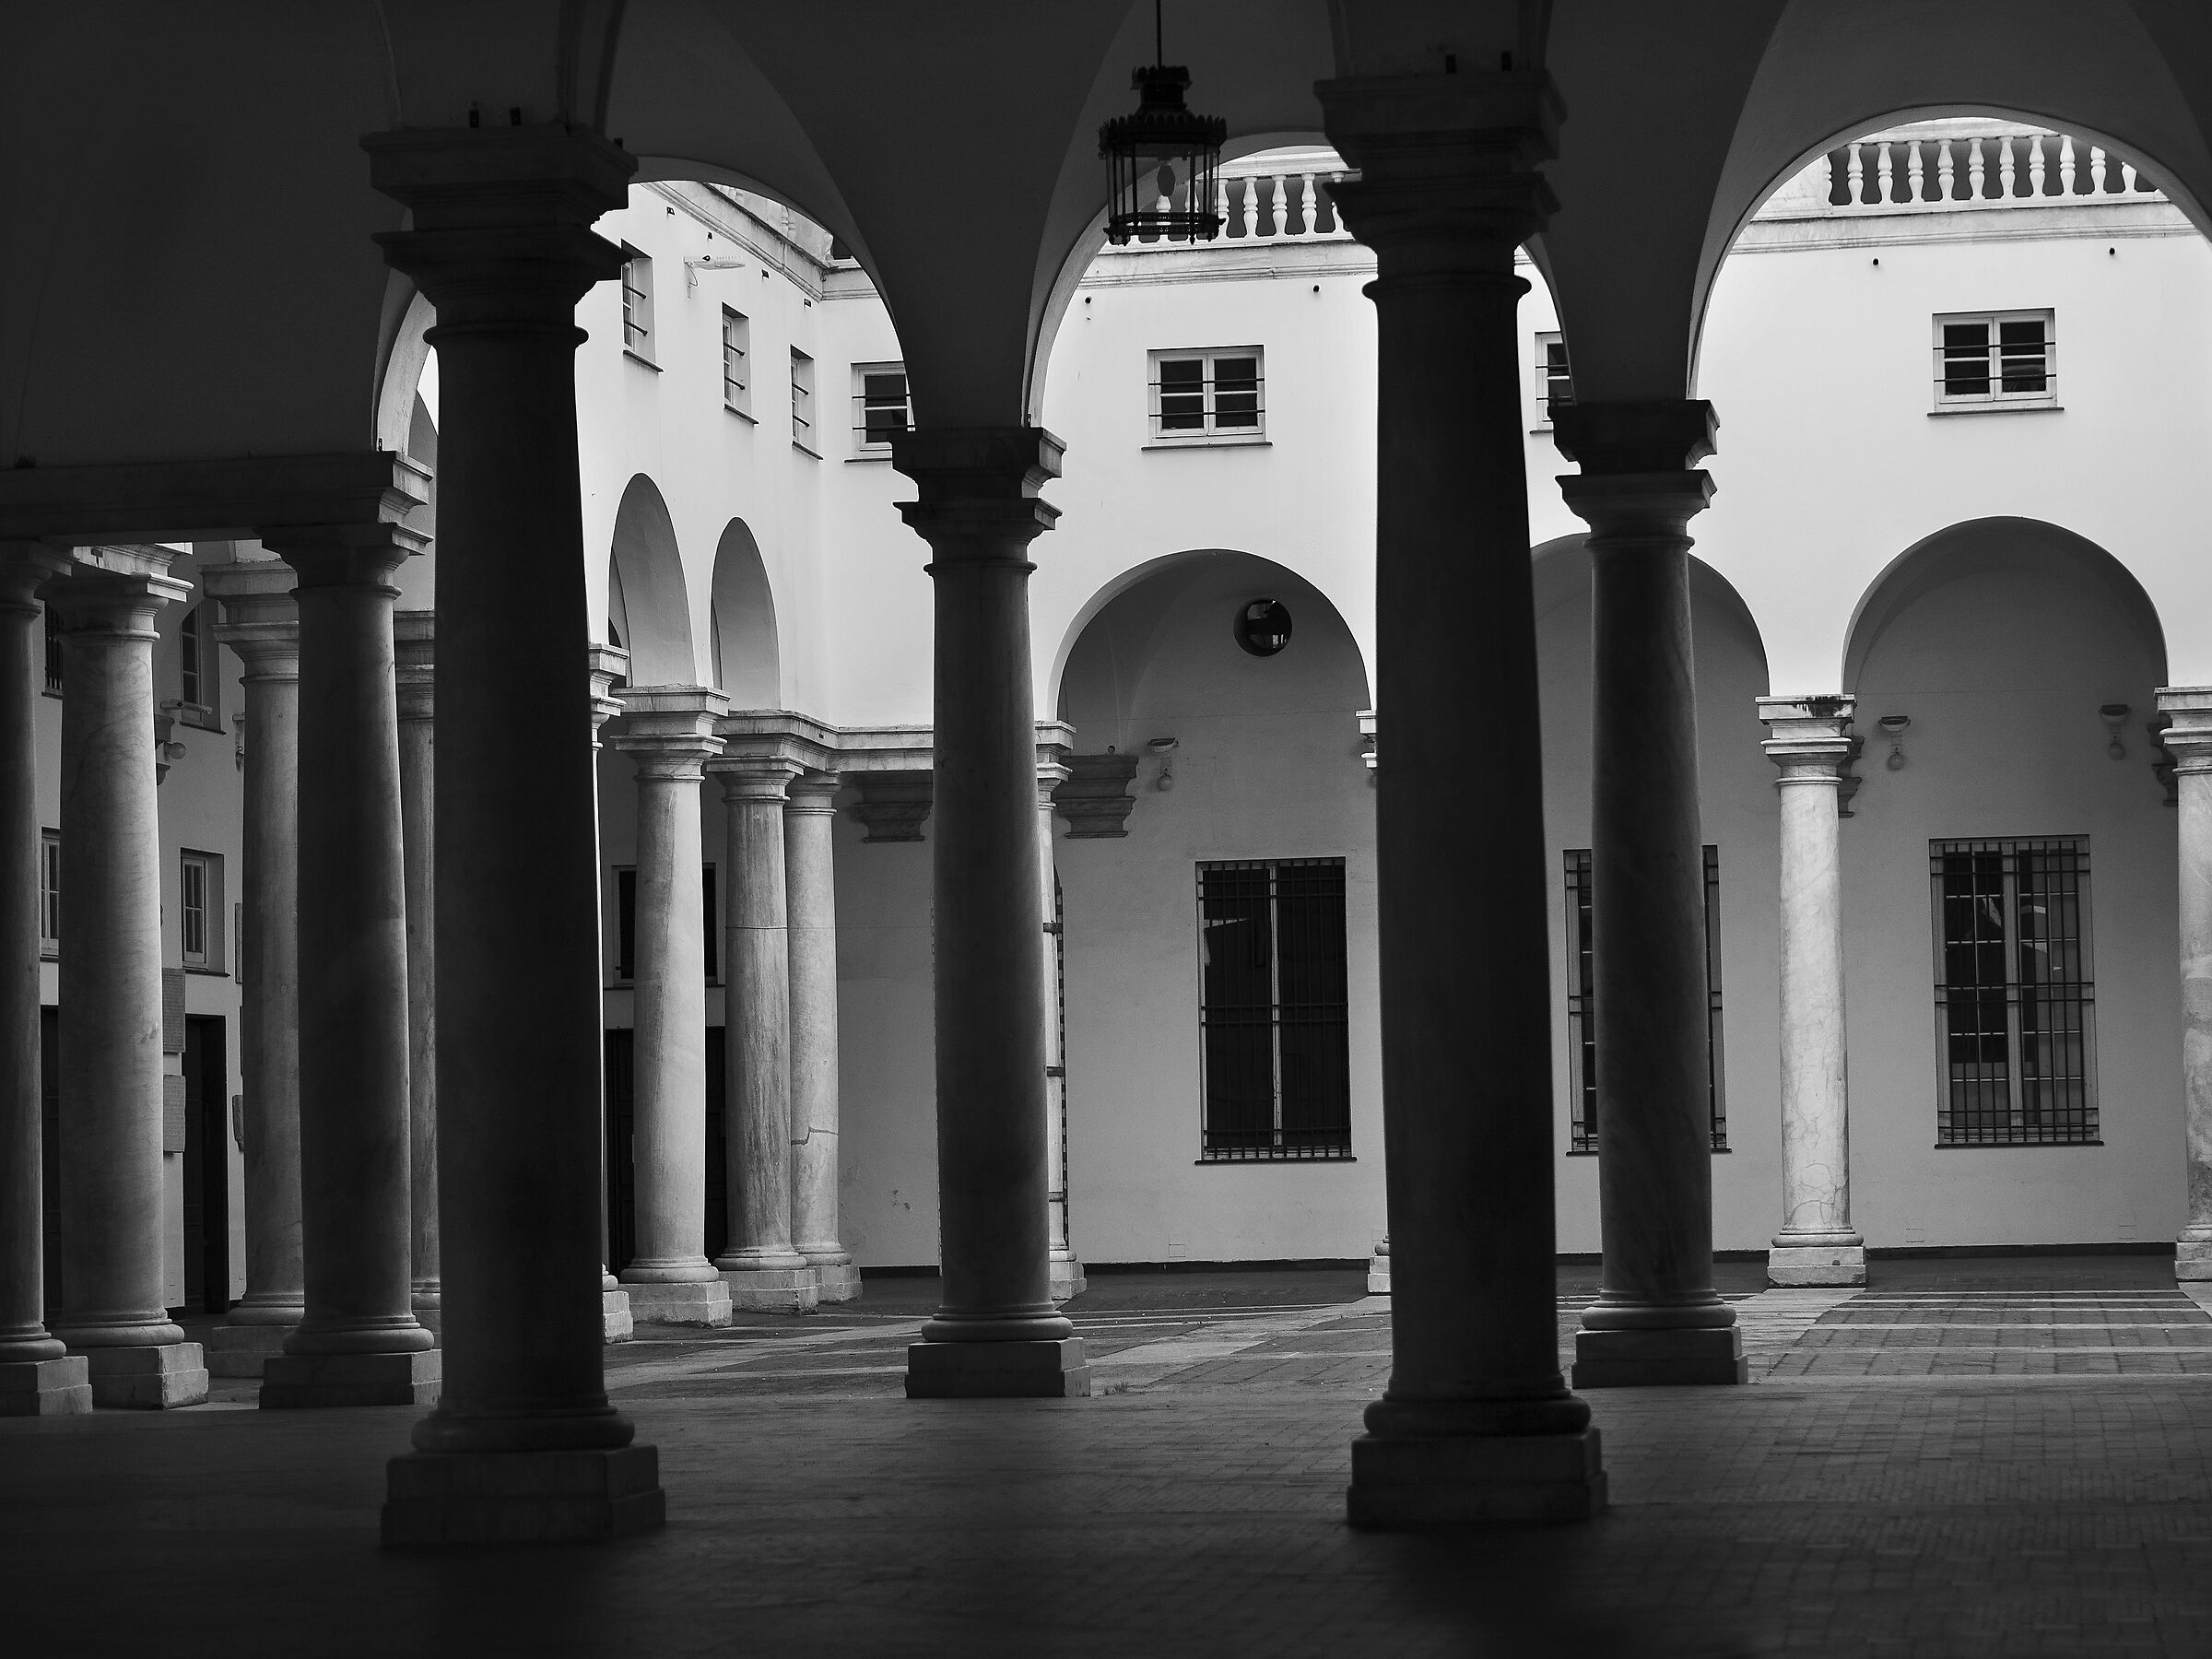 Genoa - Portico ducal palace - particular...